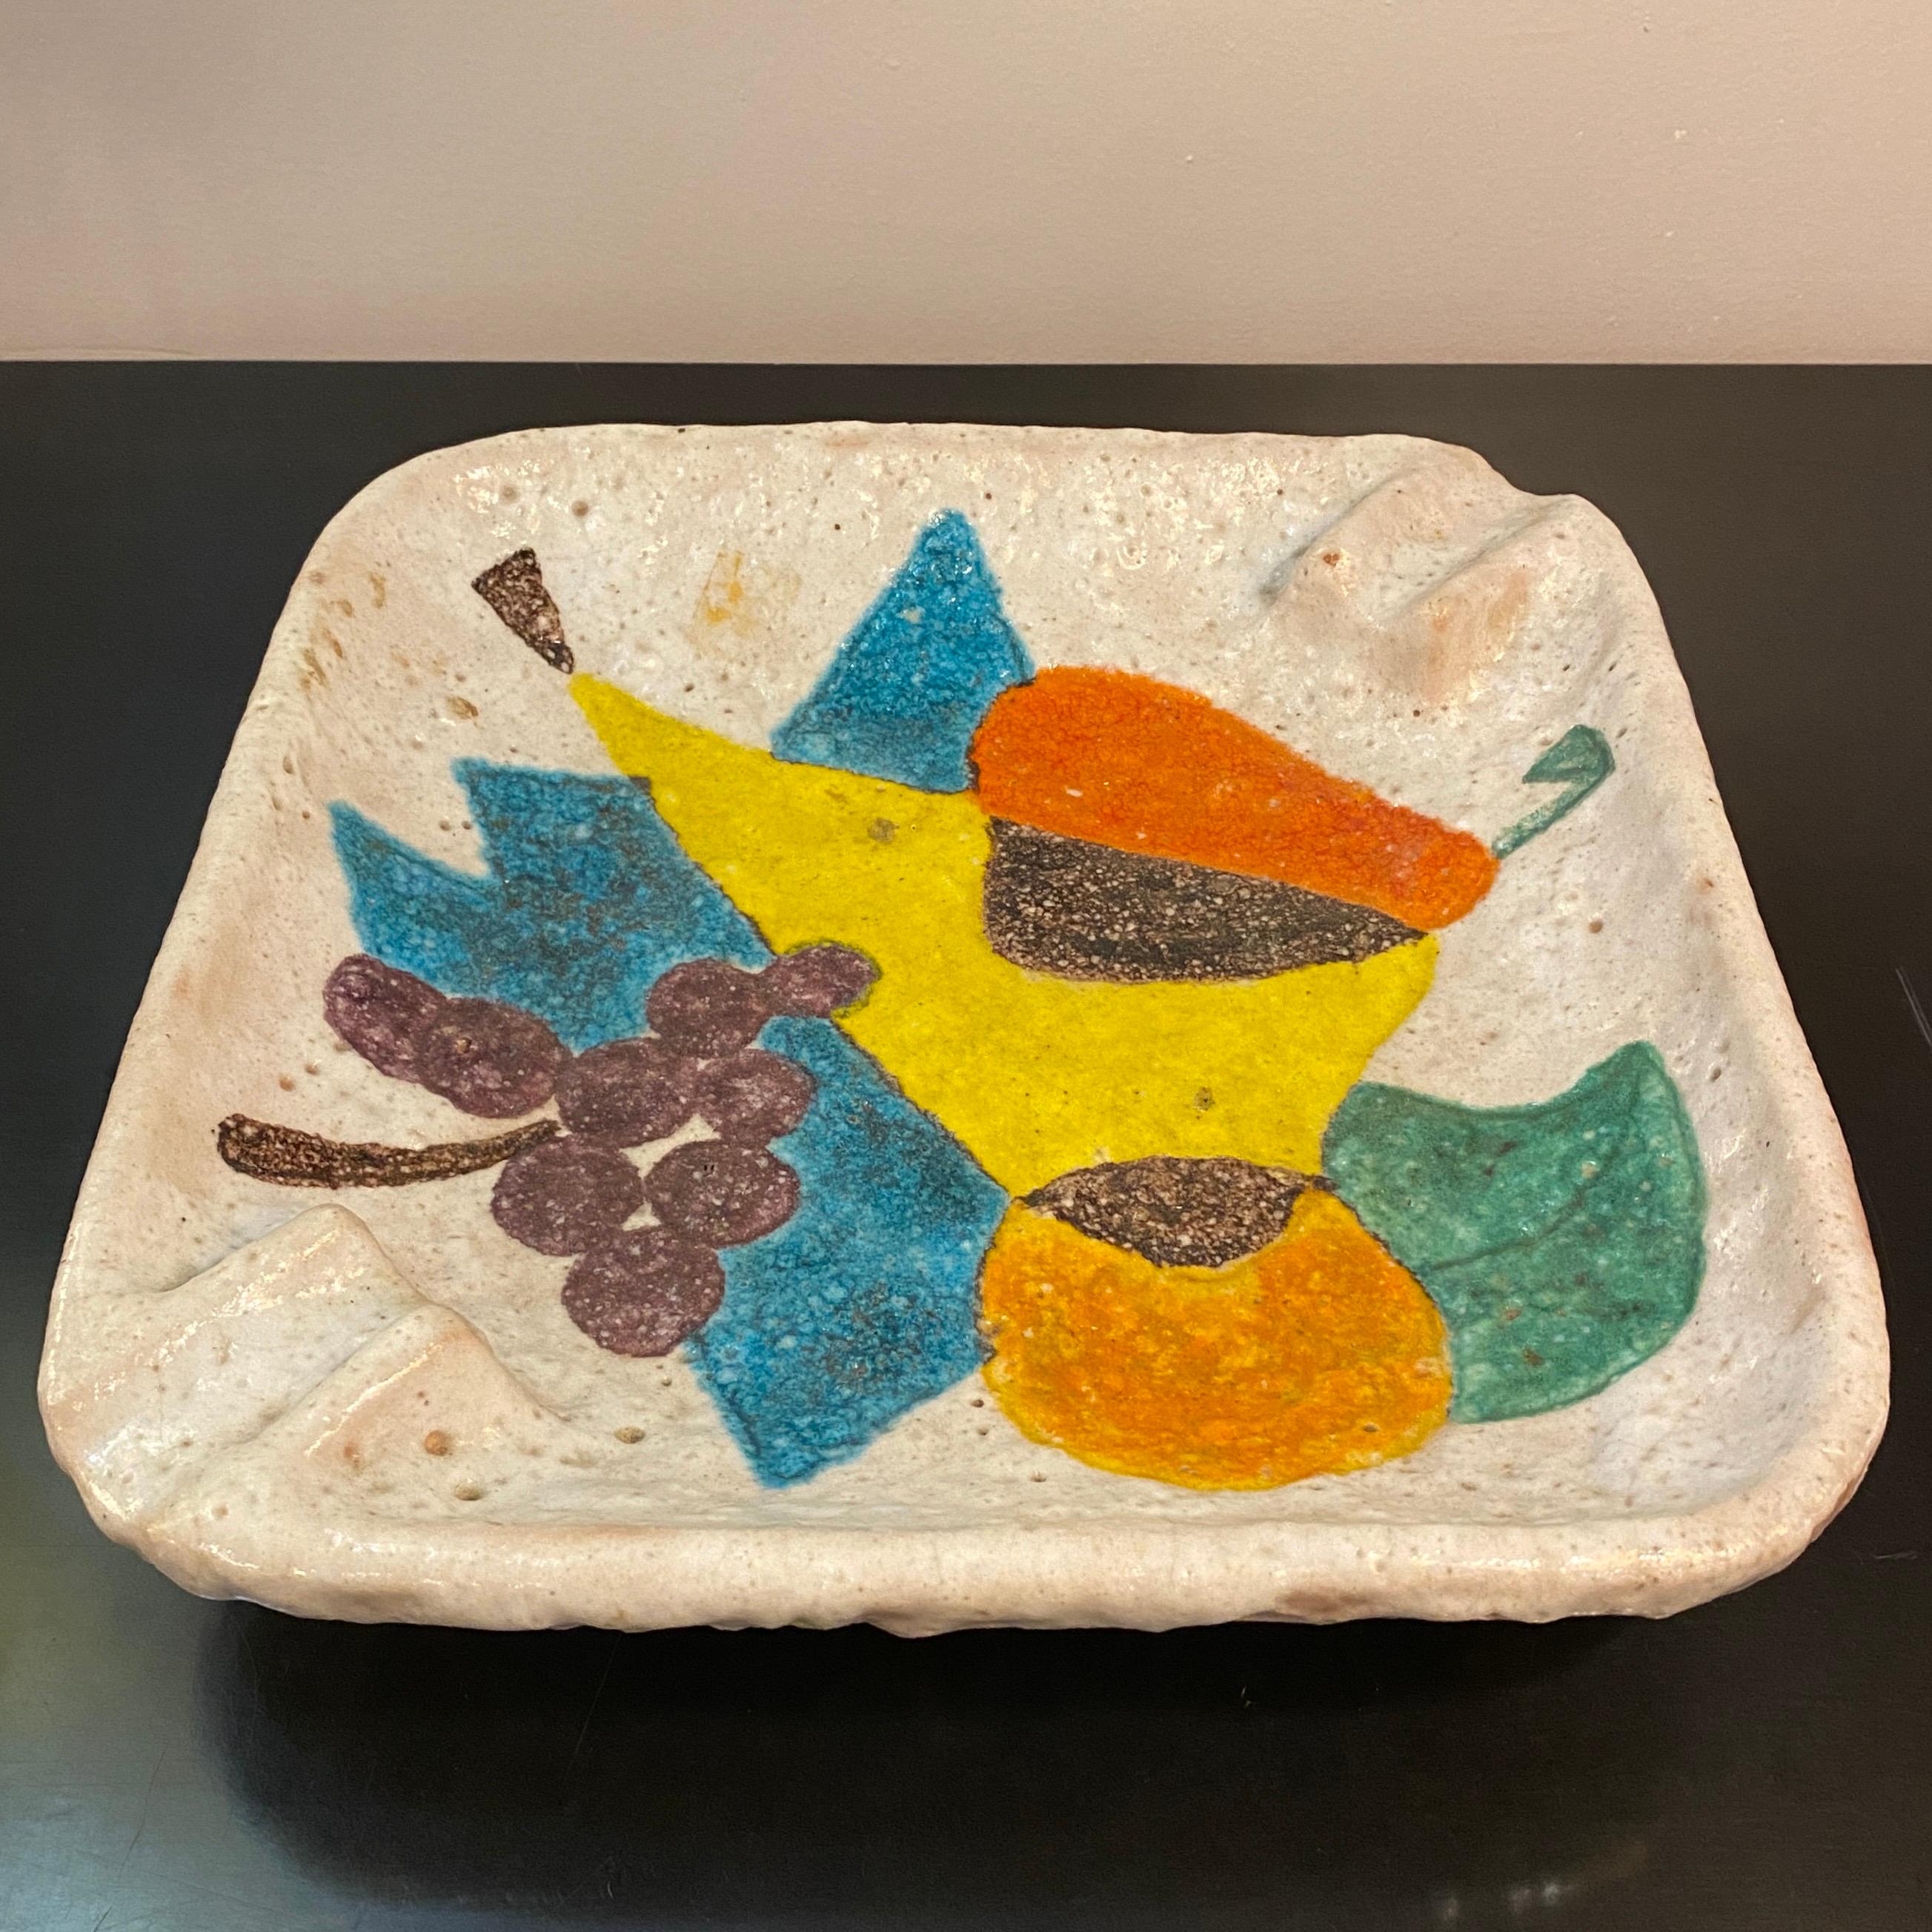 Large, Italian, midcentury modern, art pottery ashtray by Raymor features a painted, multicolor, abstract fruit arrangement.. The tray has a lava glaze technique which gives the surface a smooth yet irregular texture. The tray feels weighty with the